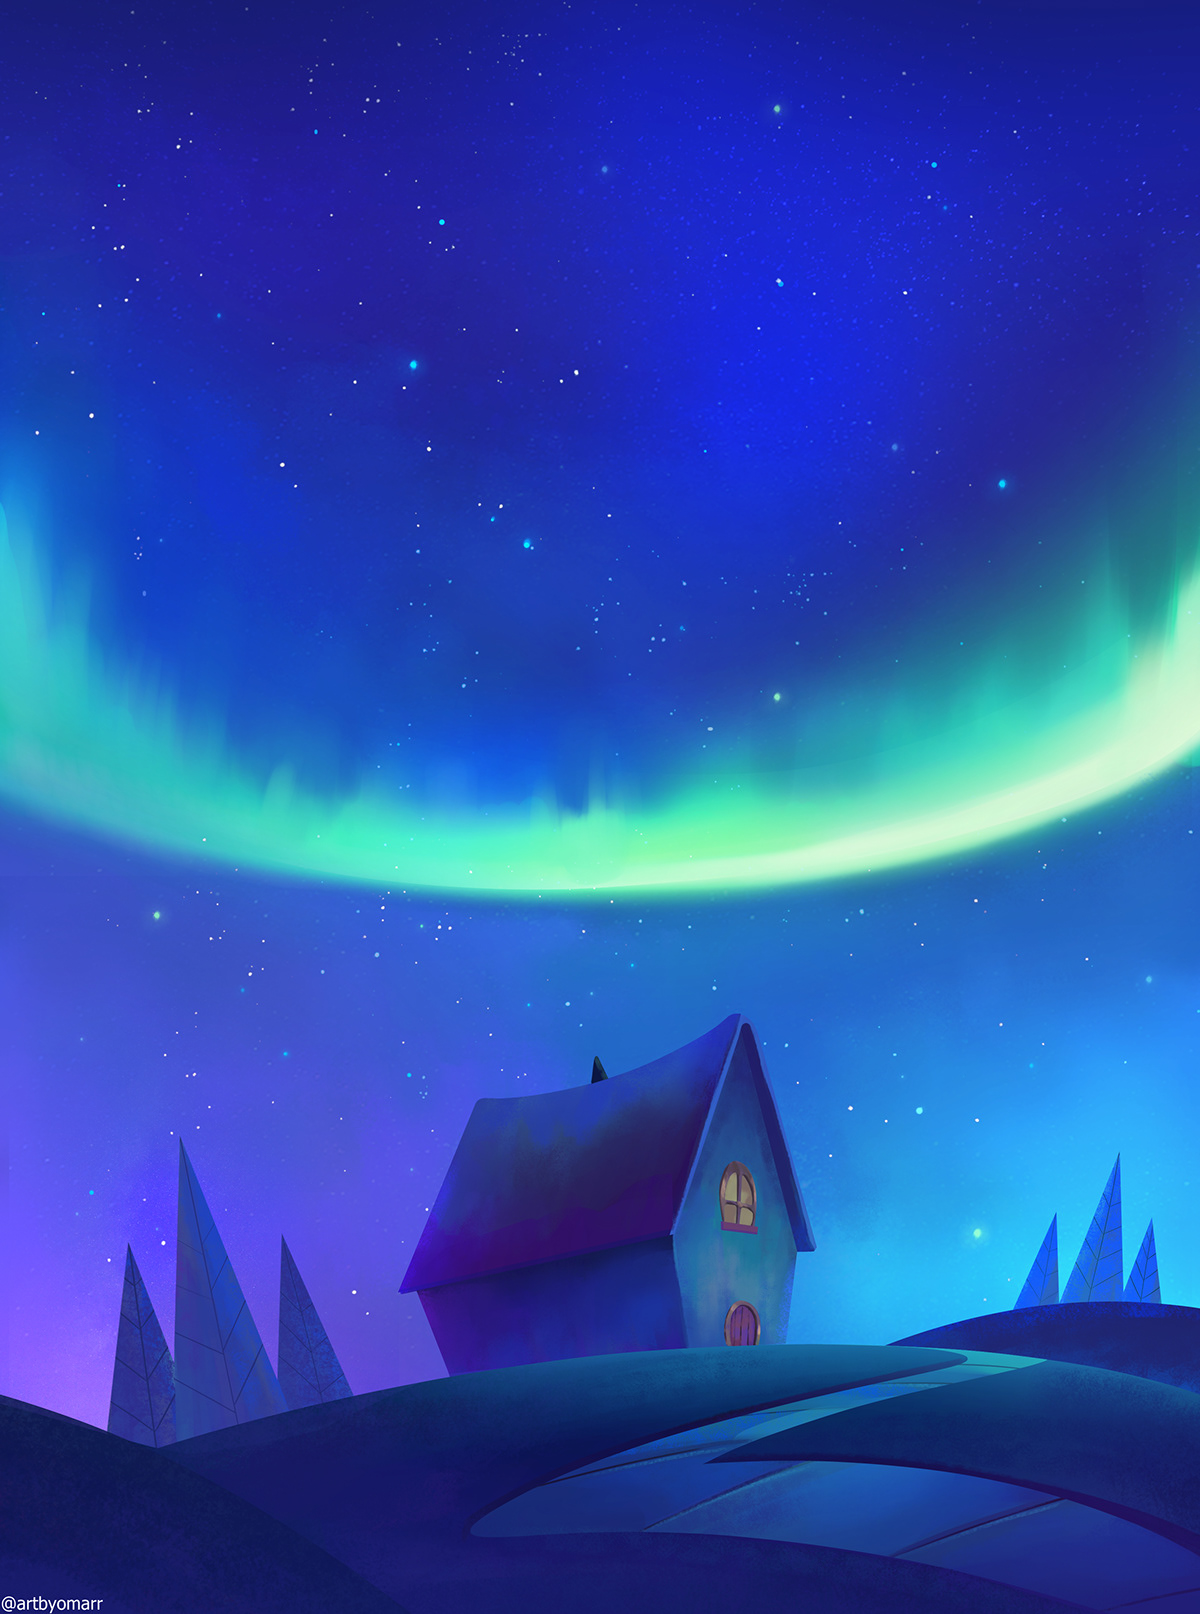 Drawing  ILLUSTRATION  Northen lights painting   SKY